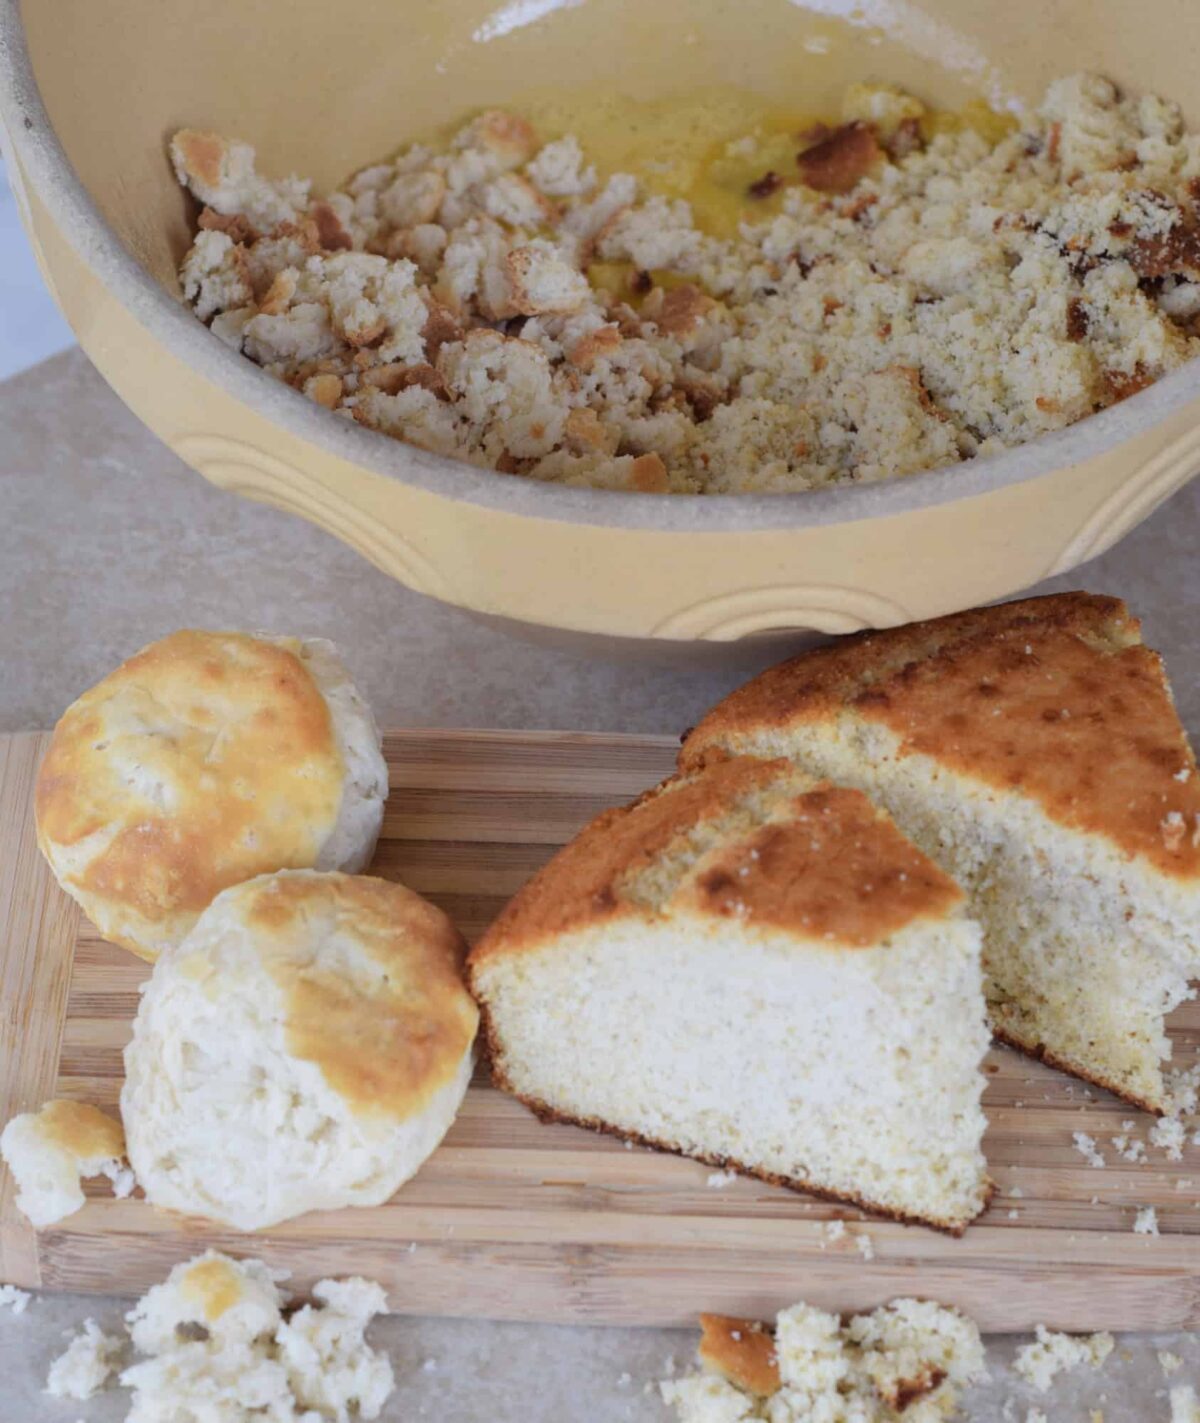 cornbread slices and 2 biscuits on wooden cutting board with bread crumbled in bowl